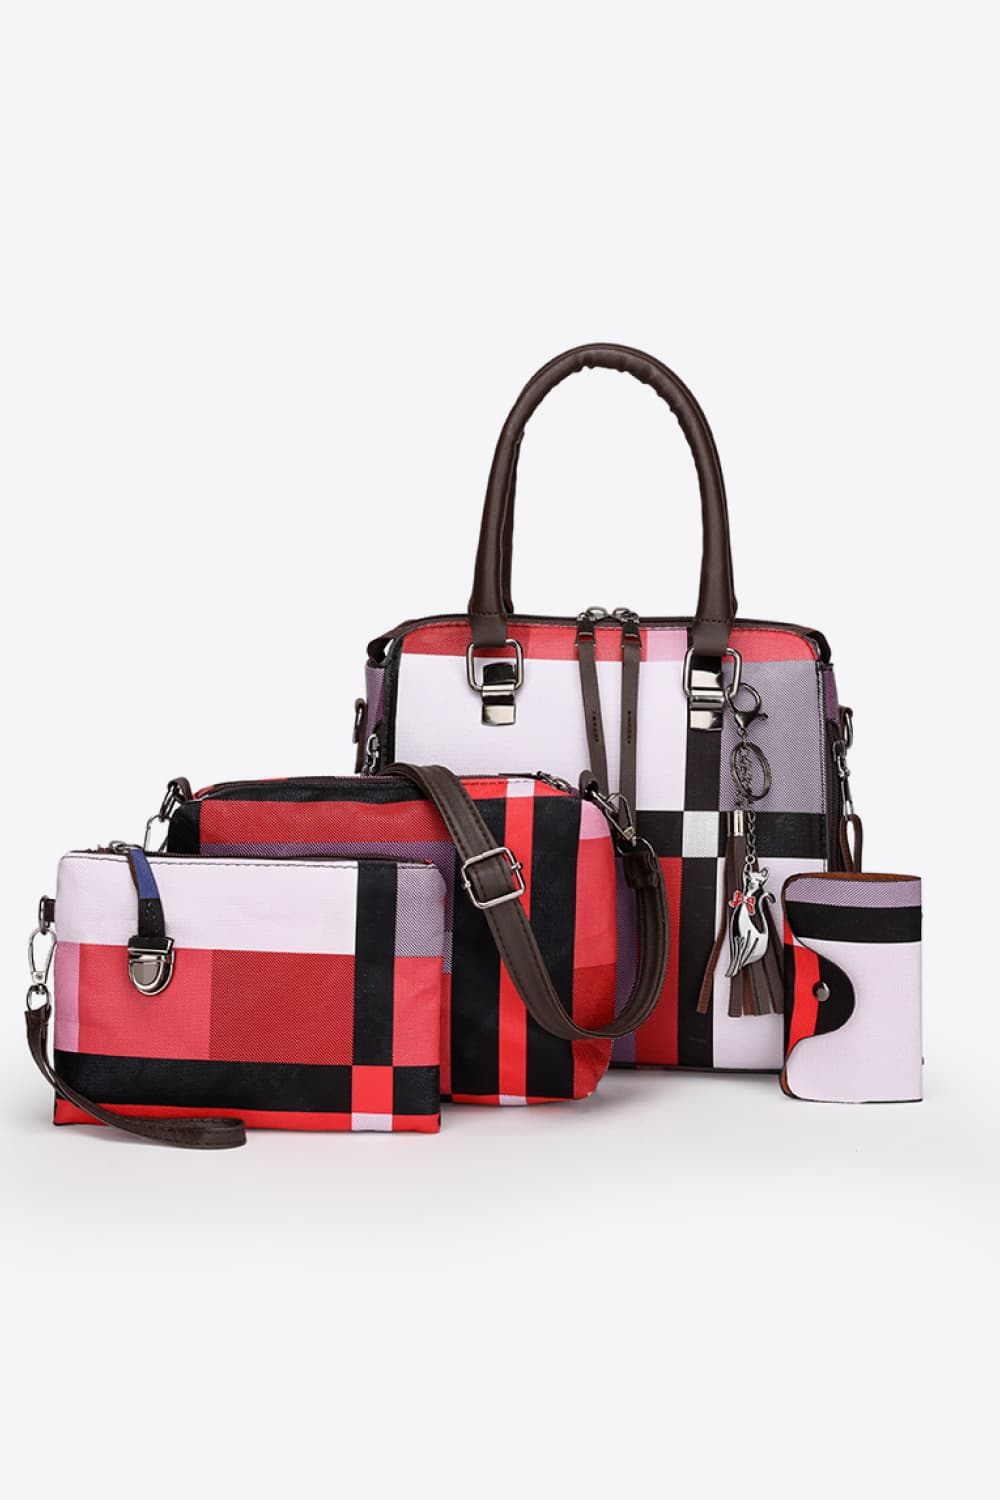 4-Piece Color Block PU Leather Bag Set - By Baano